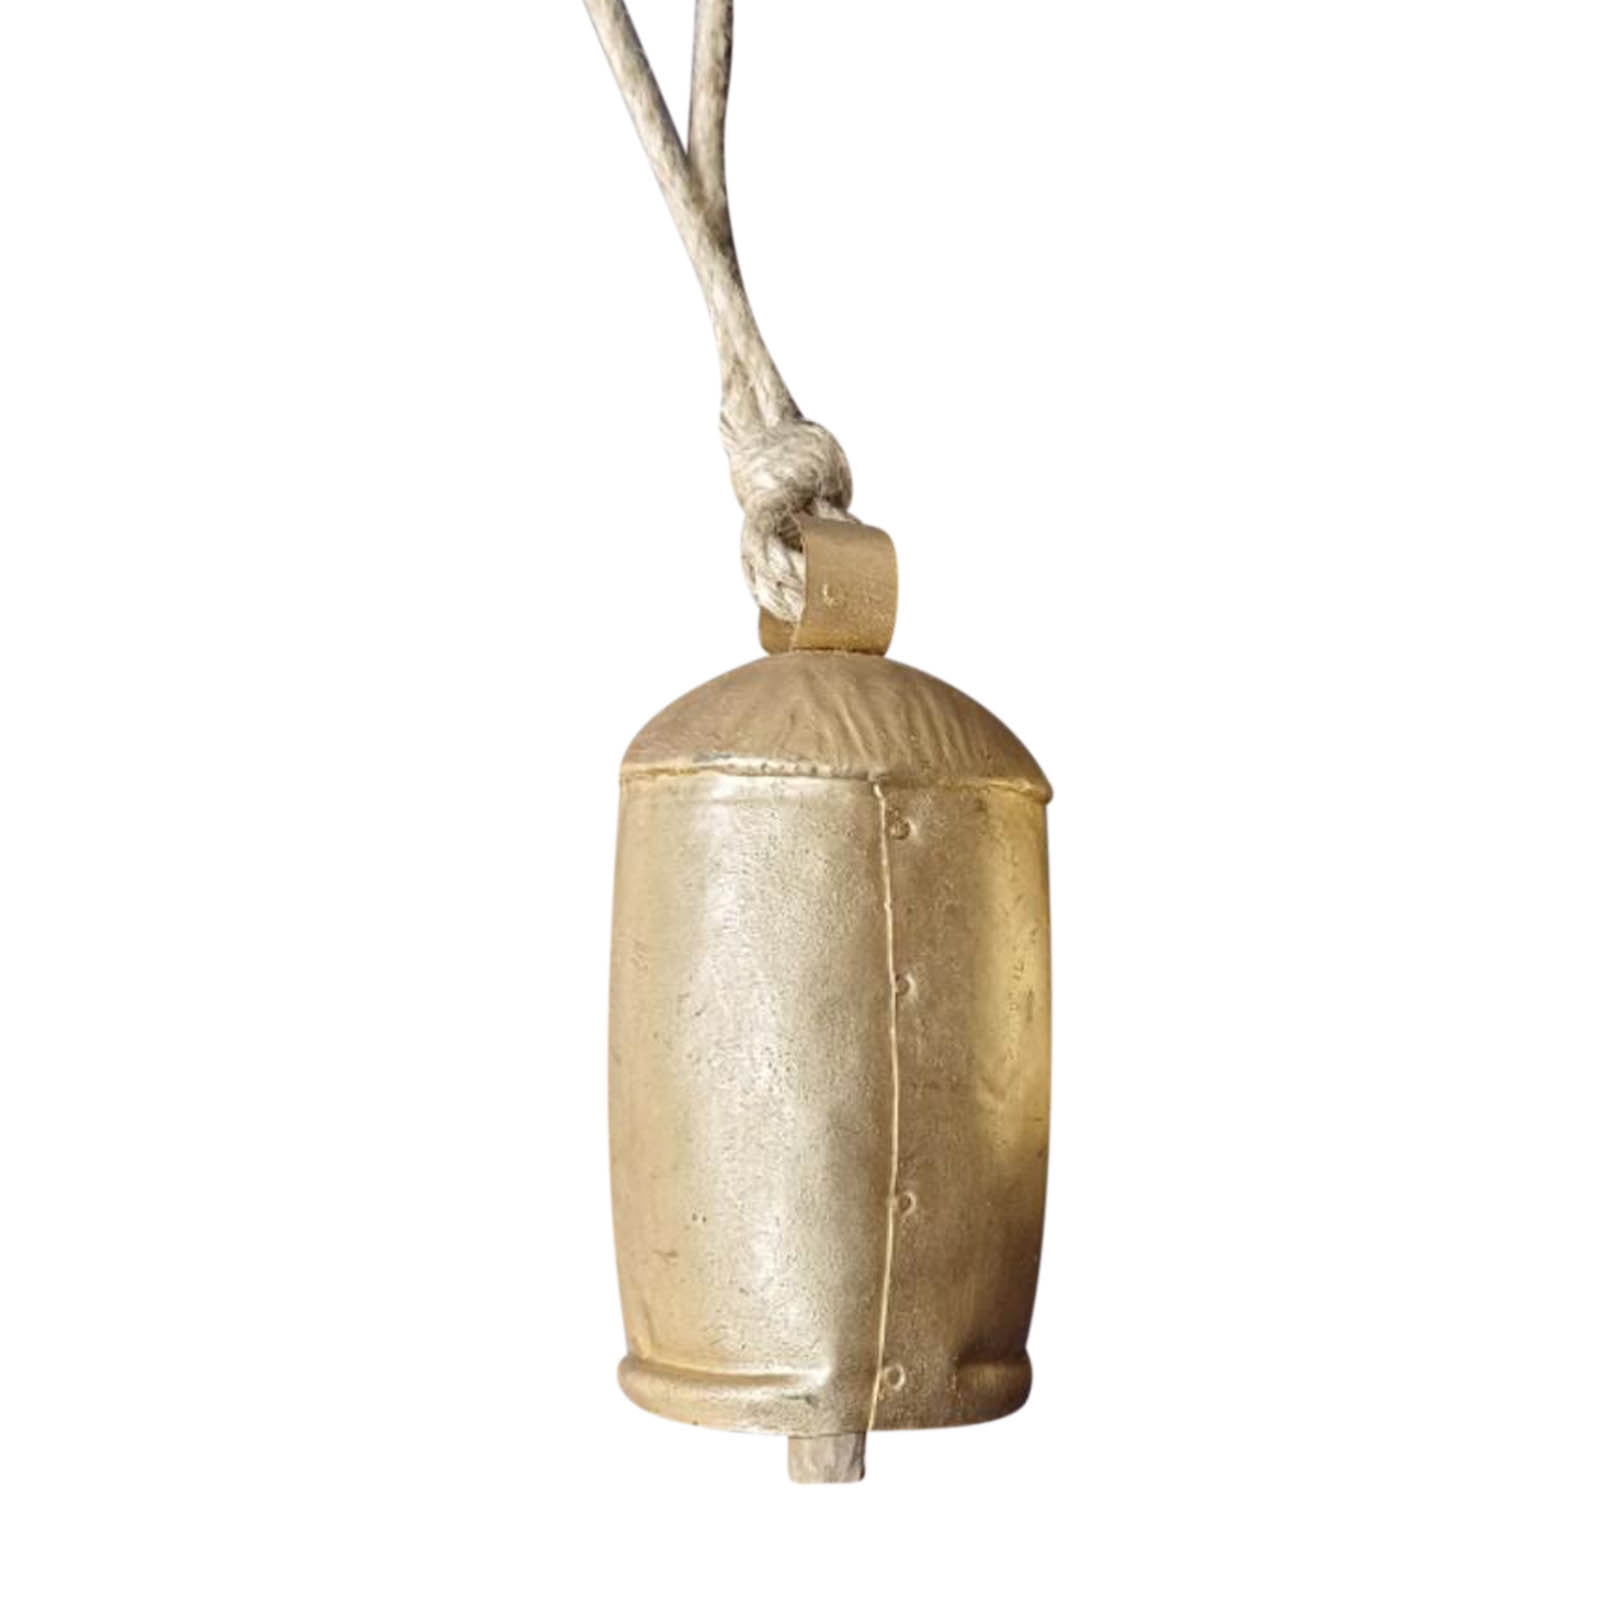  NOLITOY 3pcs Brass Bell Hanging Bell for Home Hand